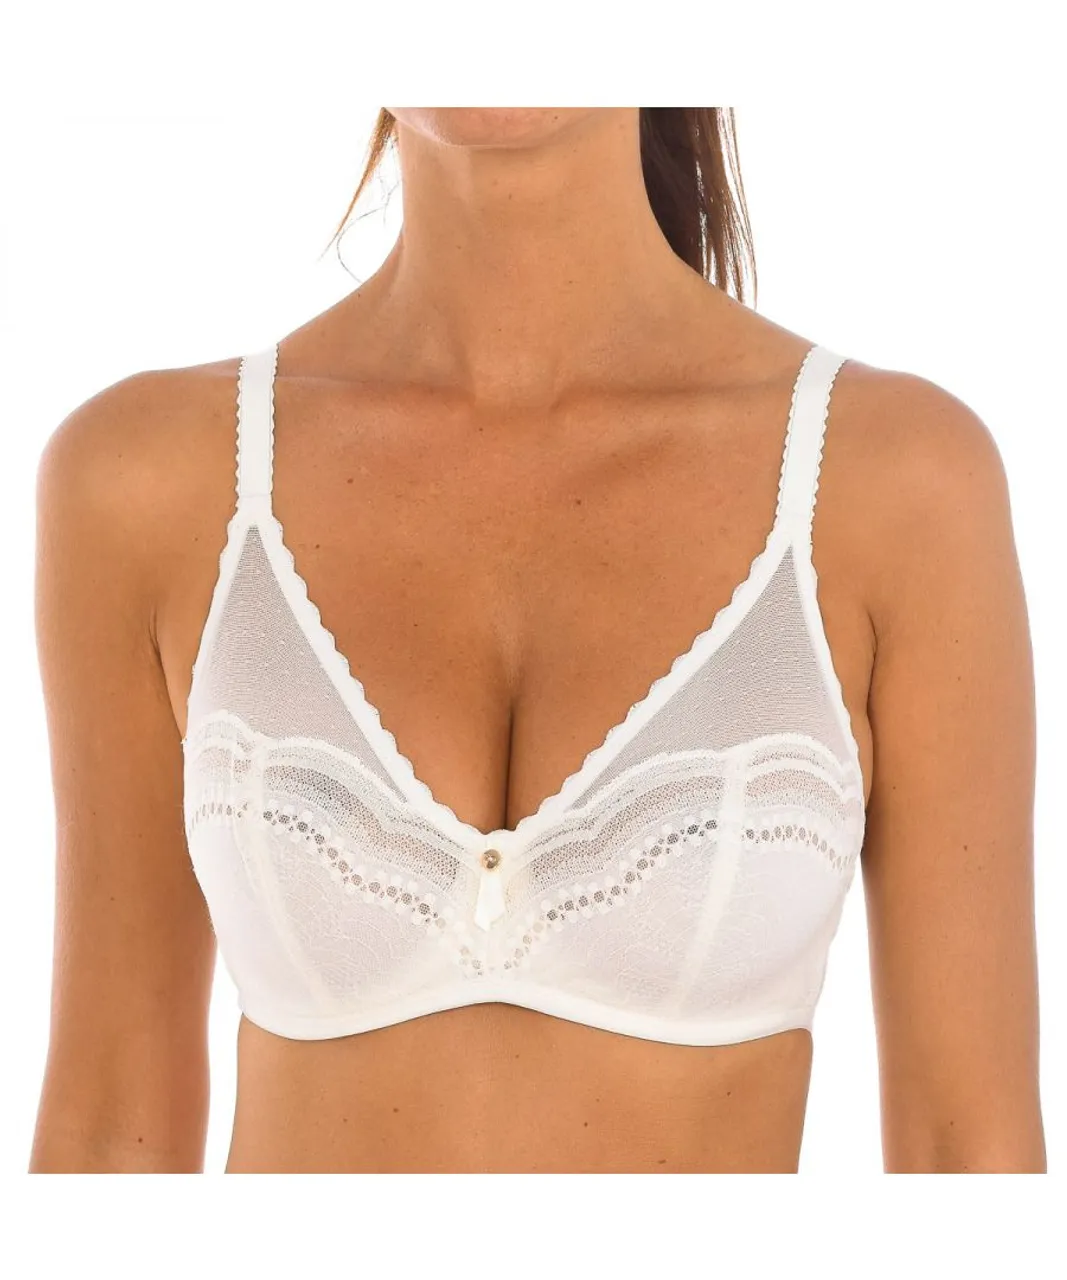 Playtex Womenss bra with underwire and cups P09AV - White